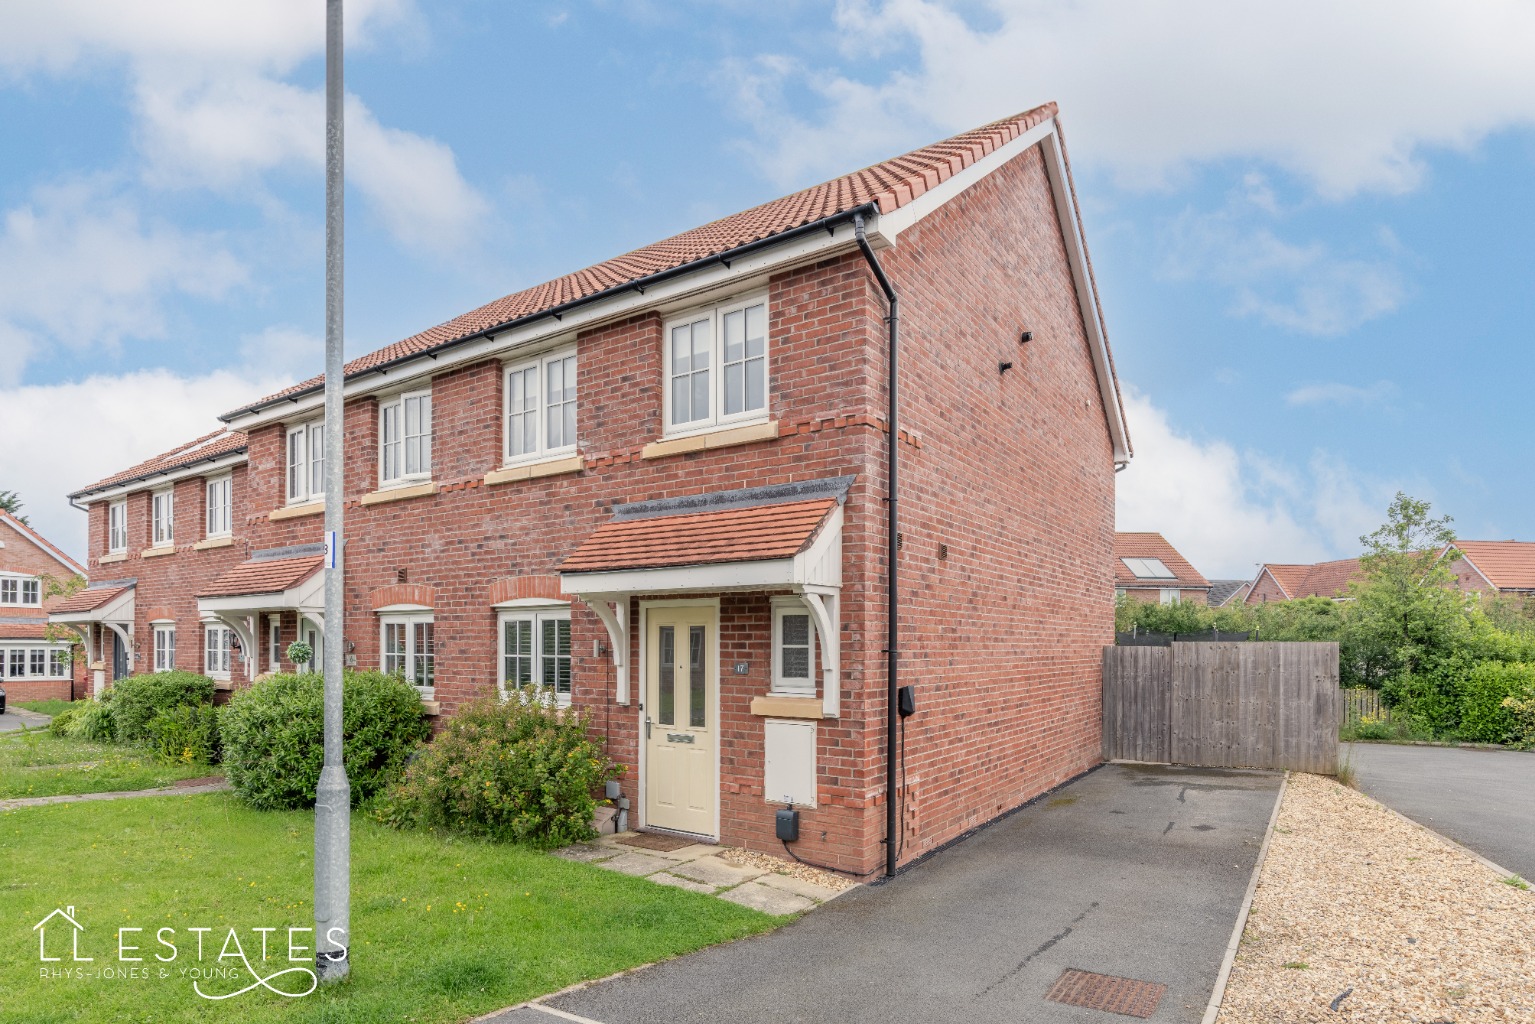 3 bed end of terrace house for sale in Clos Bodrhyddan, Rhyl - Property Image 1